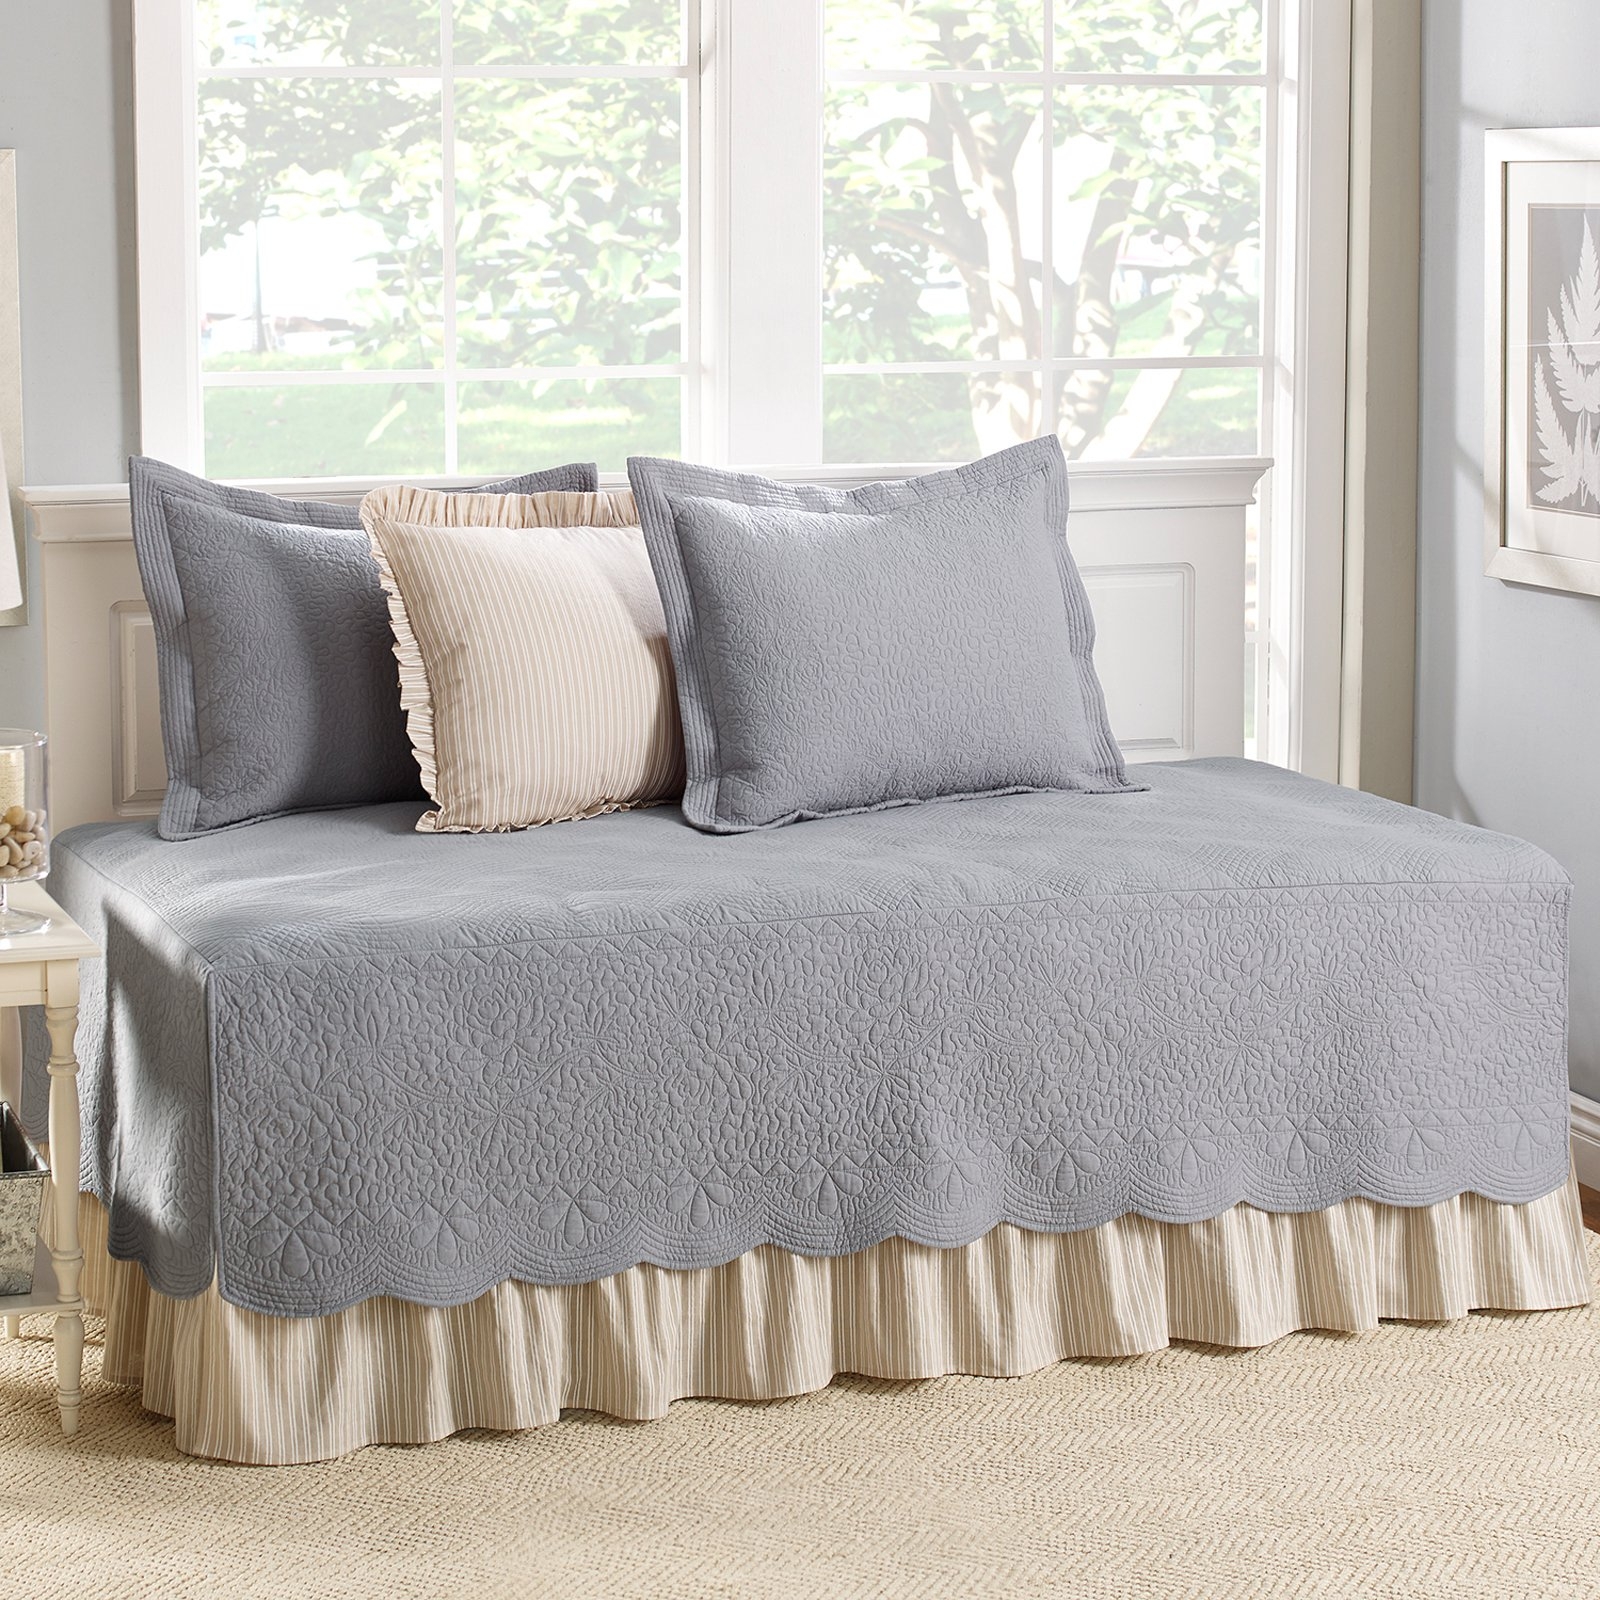 Trellis 5 Piece Daybed Cover Set in Grey